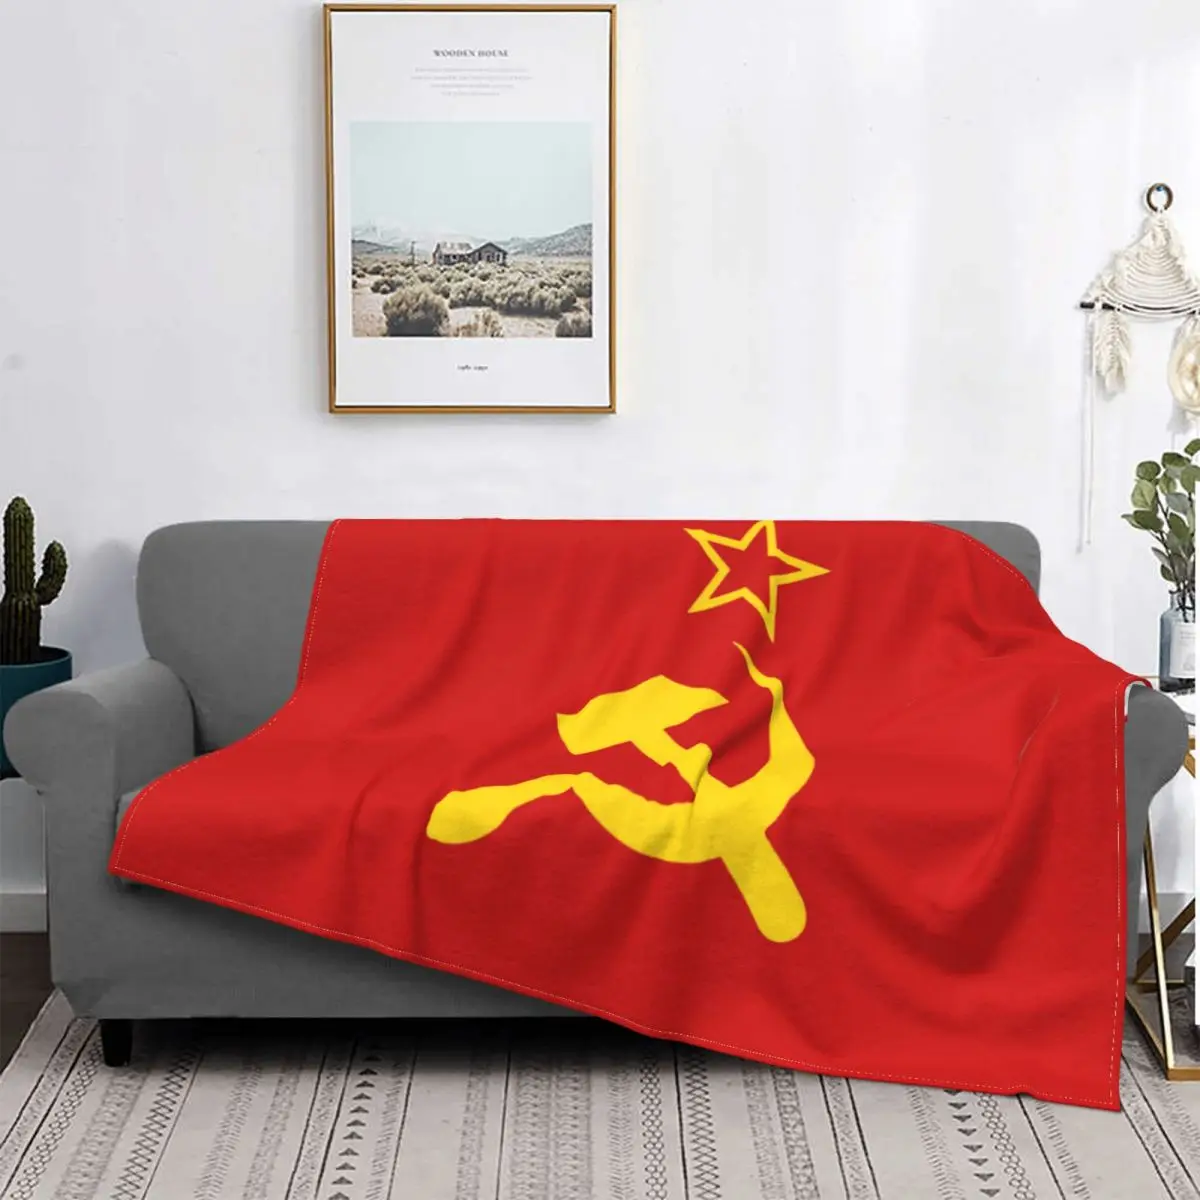 

USSR Hammer And Sickle Russian Soviet Flag Blanket Soft Fleece Autumn Warm Flannel Throw Blankets for Sofa Home Bedding Quilt